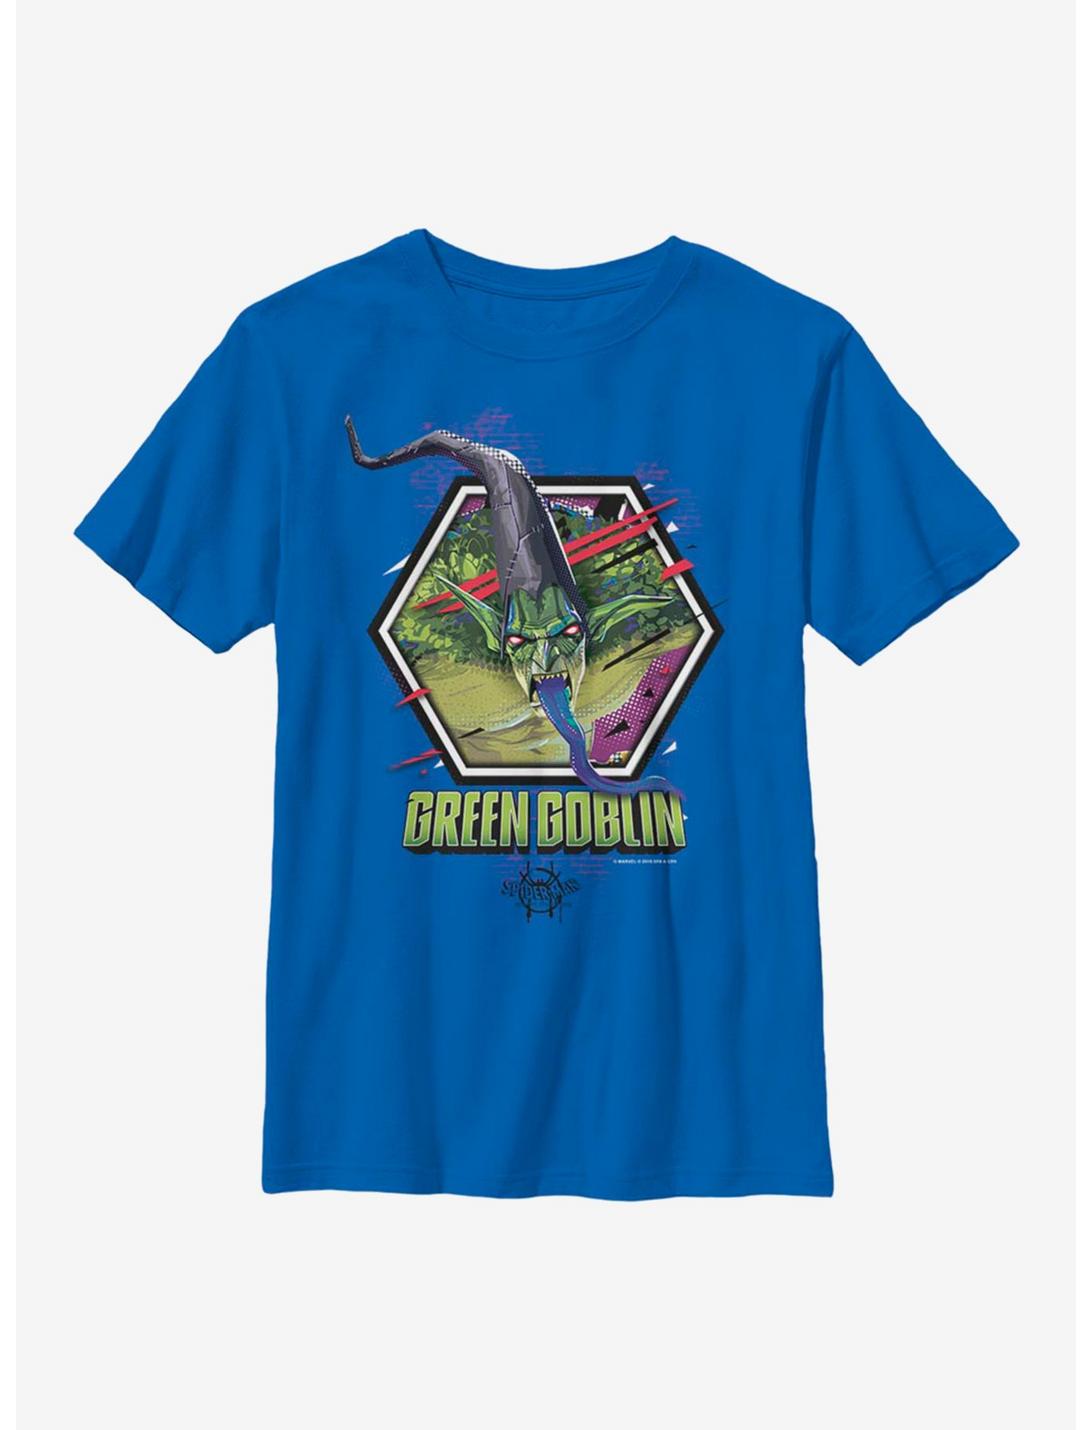 Marvel Spider-Man: Into The Spiderverse Goblin Rage Youth T-Shirt, ROYAL, hi-res